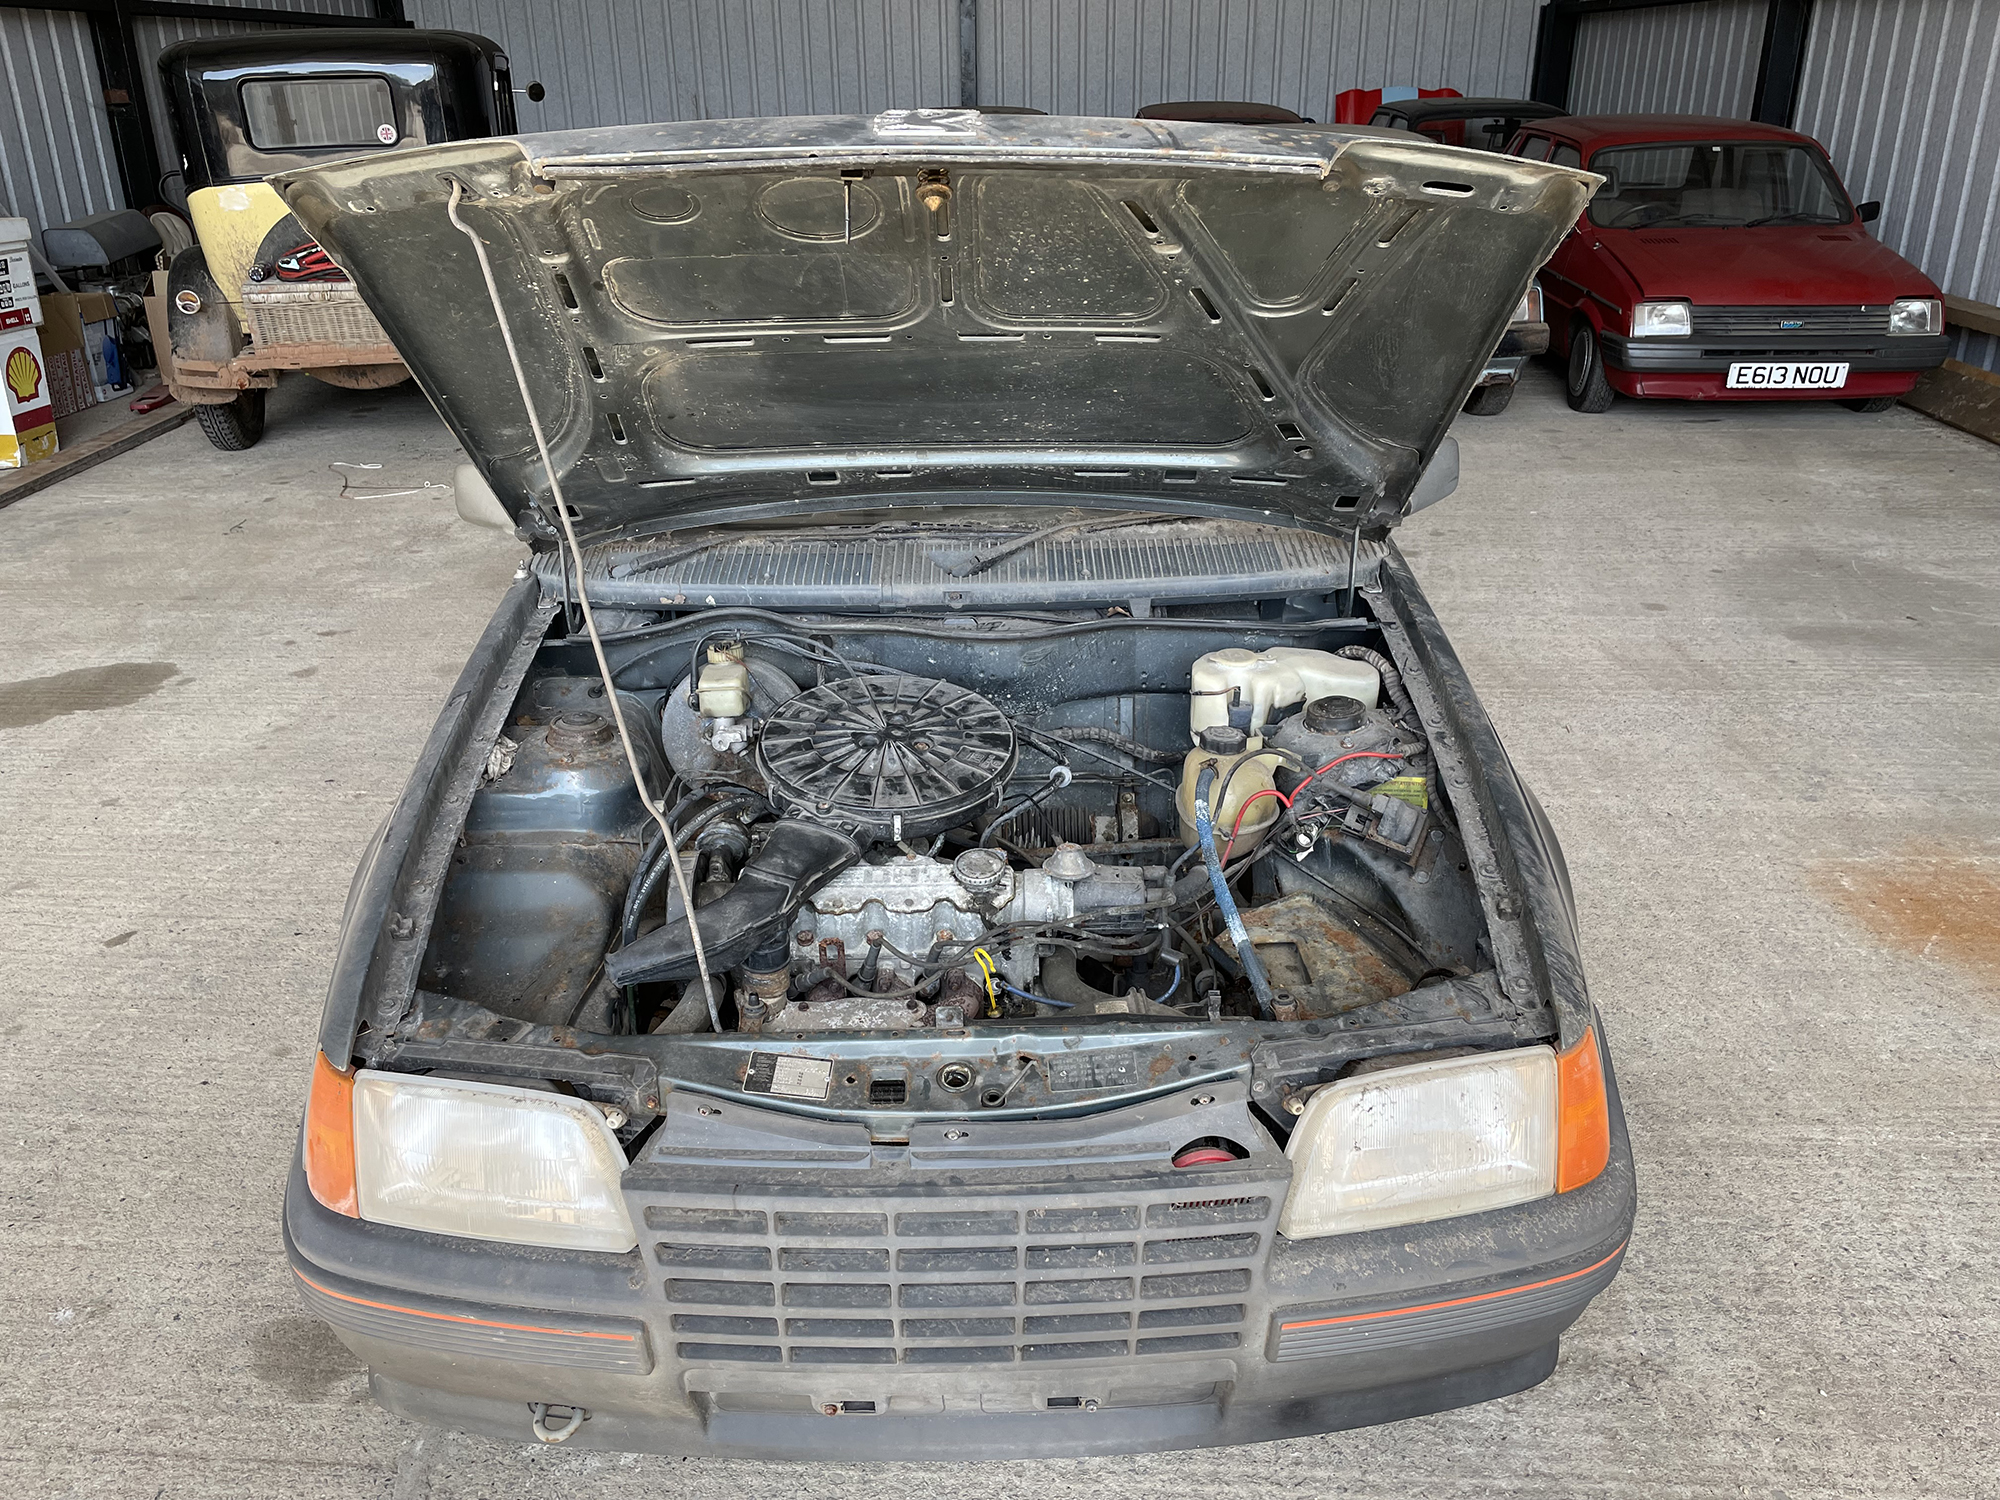 1986 Vauxhall Astra Estate Reg. no. C756 WDG Chassis no. W0L0004662557458 - Image 13 of 14